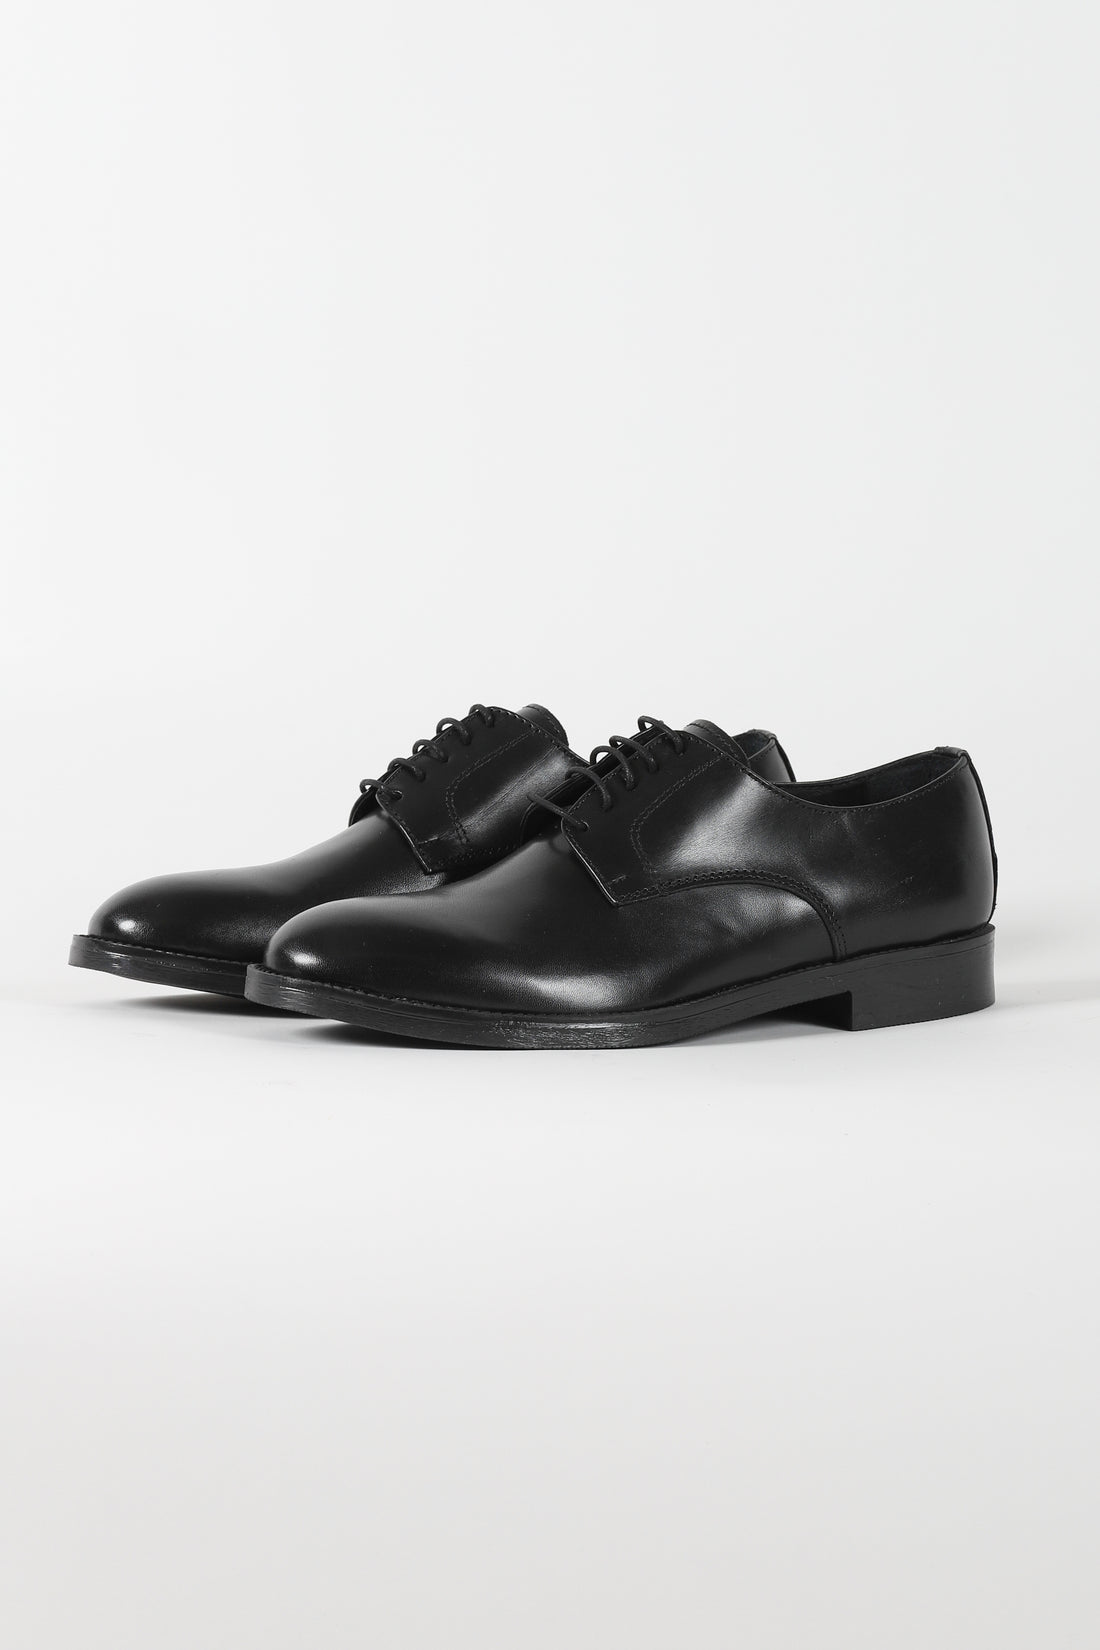 Black lace-up shoe with rubber sole